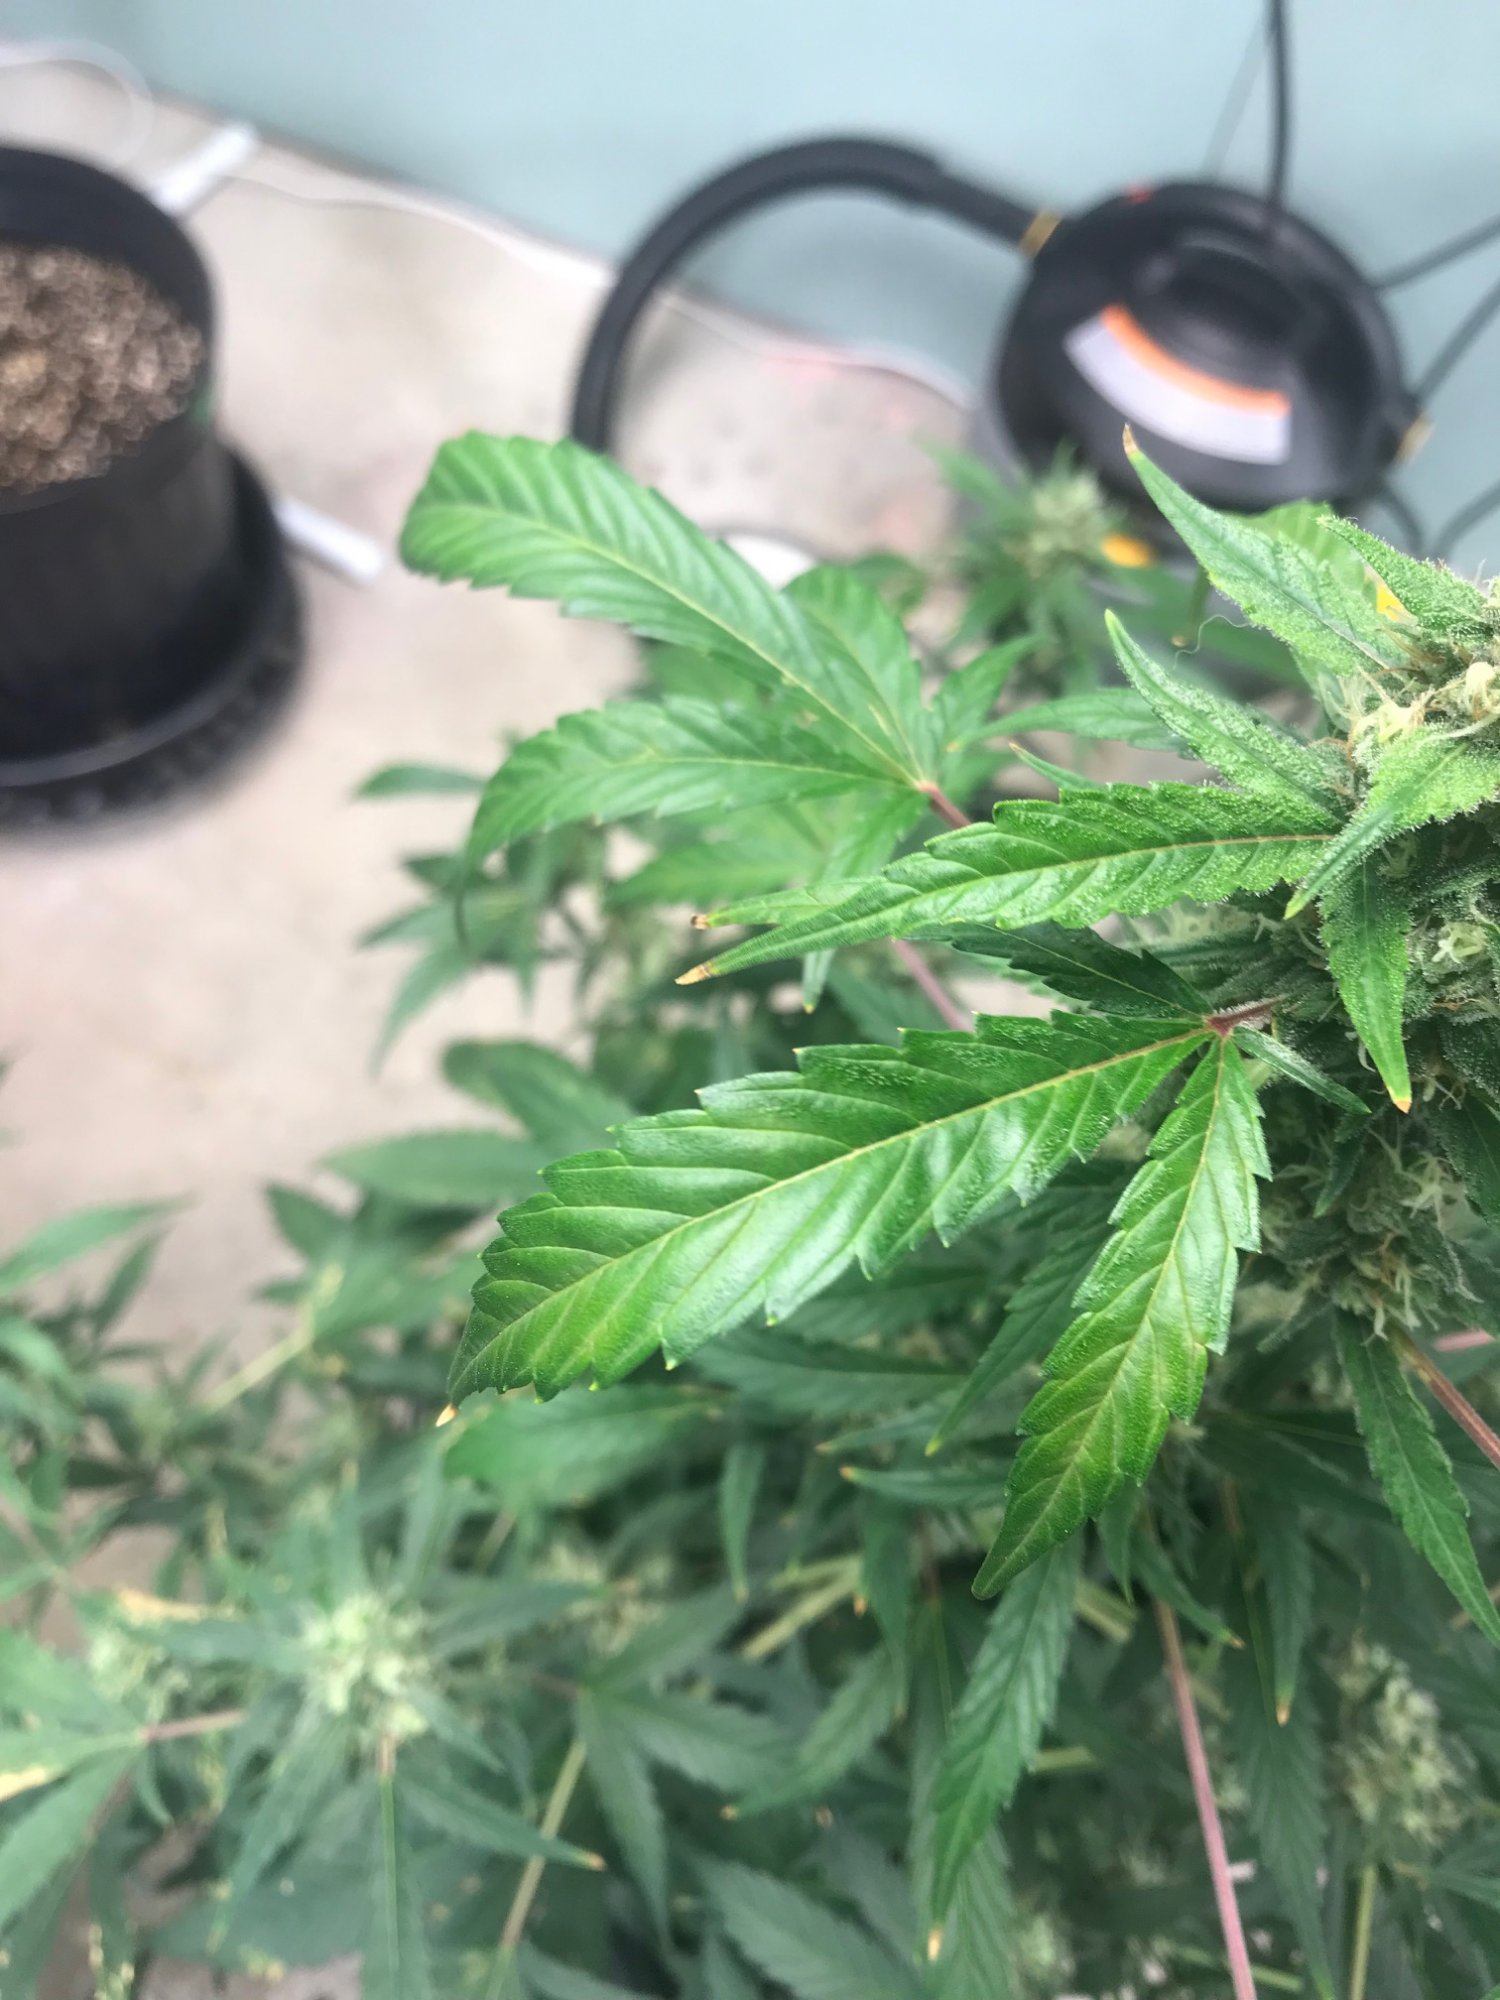 Plant leaves a bit droopy as well as showing other signs of not doing the greatest please help